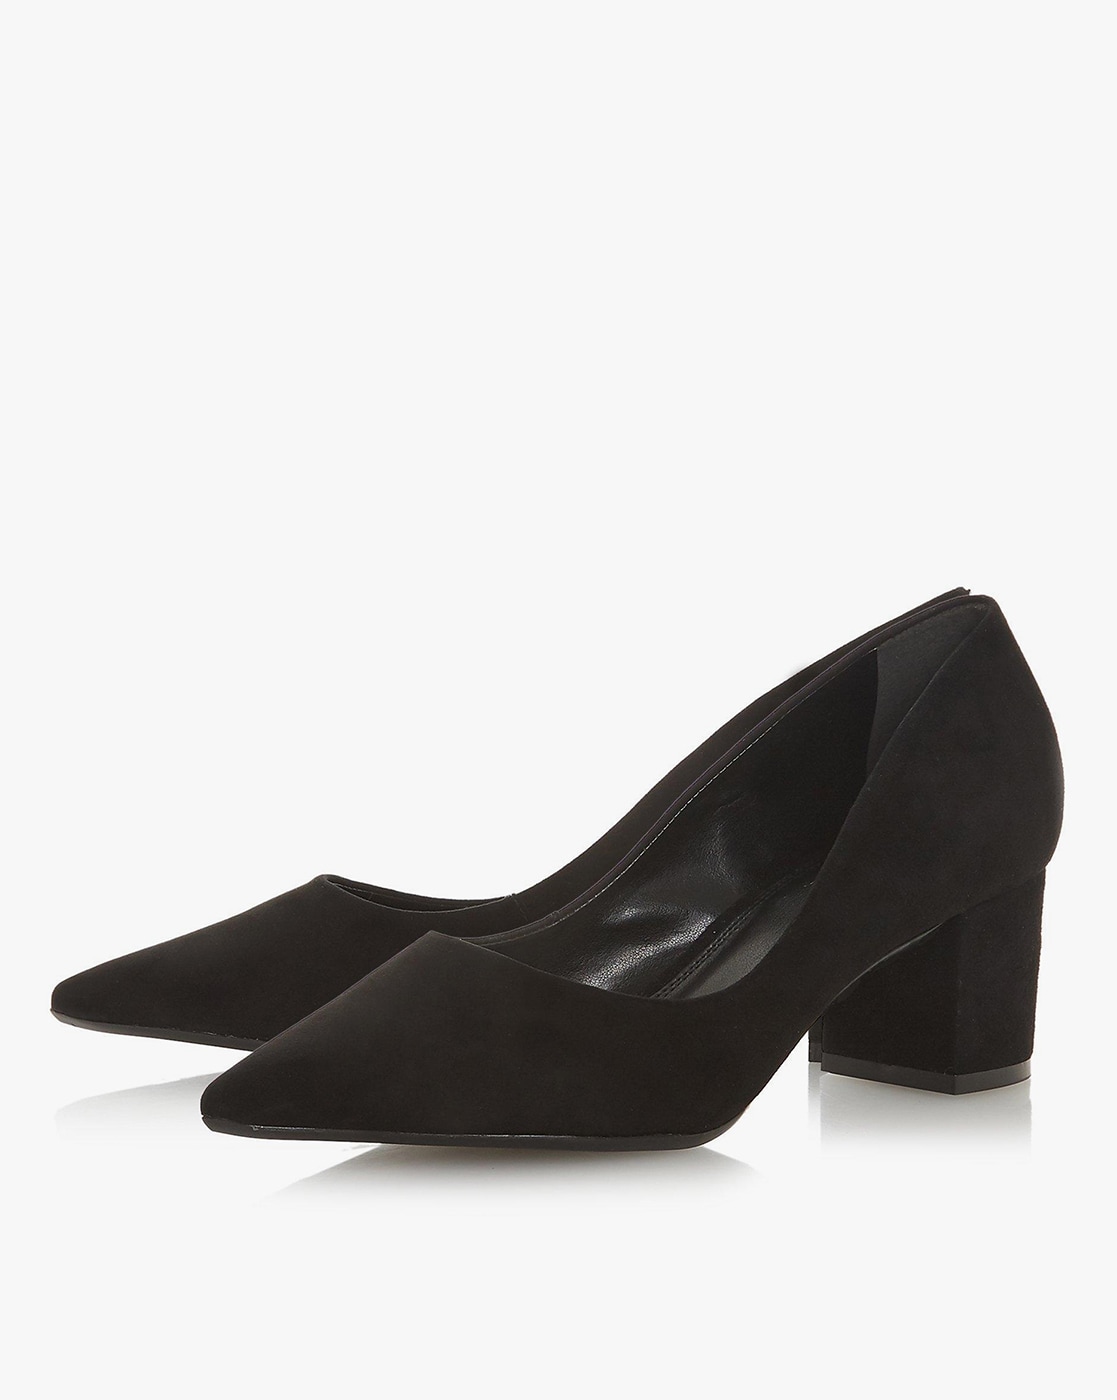 Heeled Shoes for Women by Dune London 